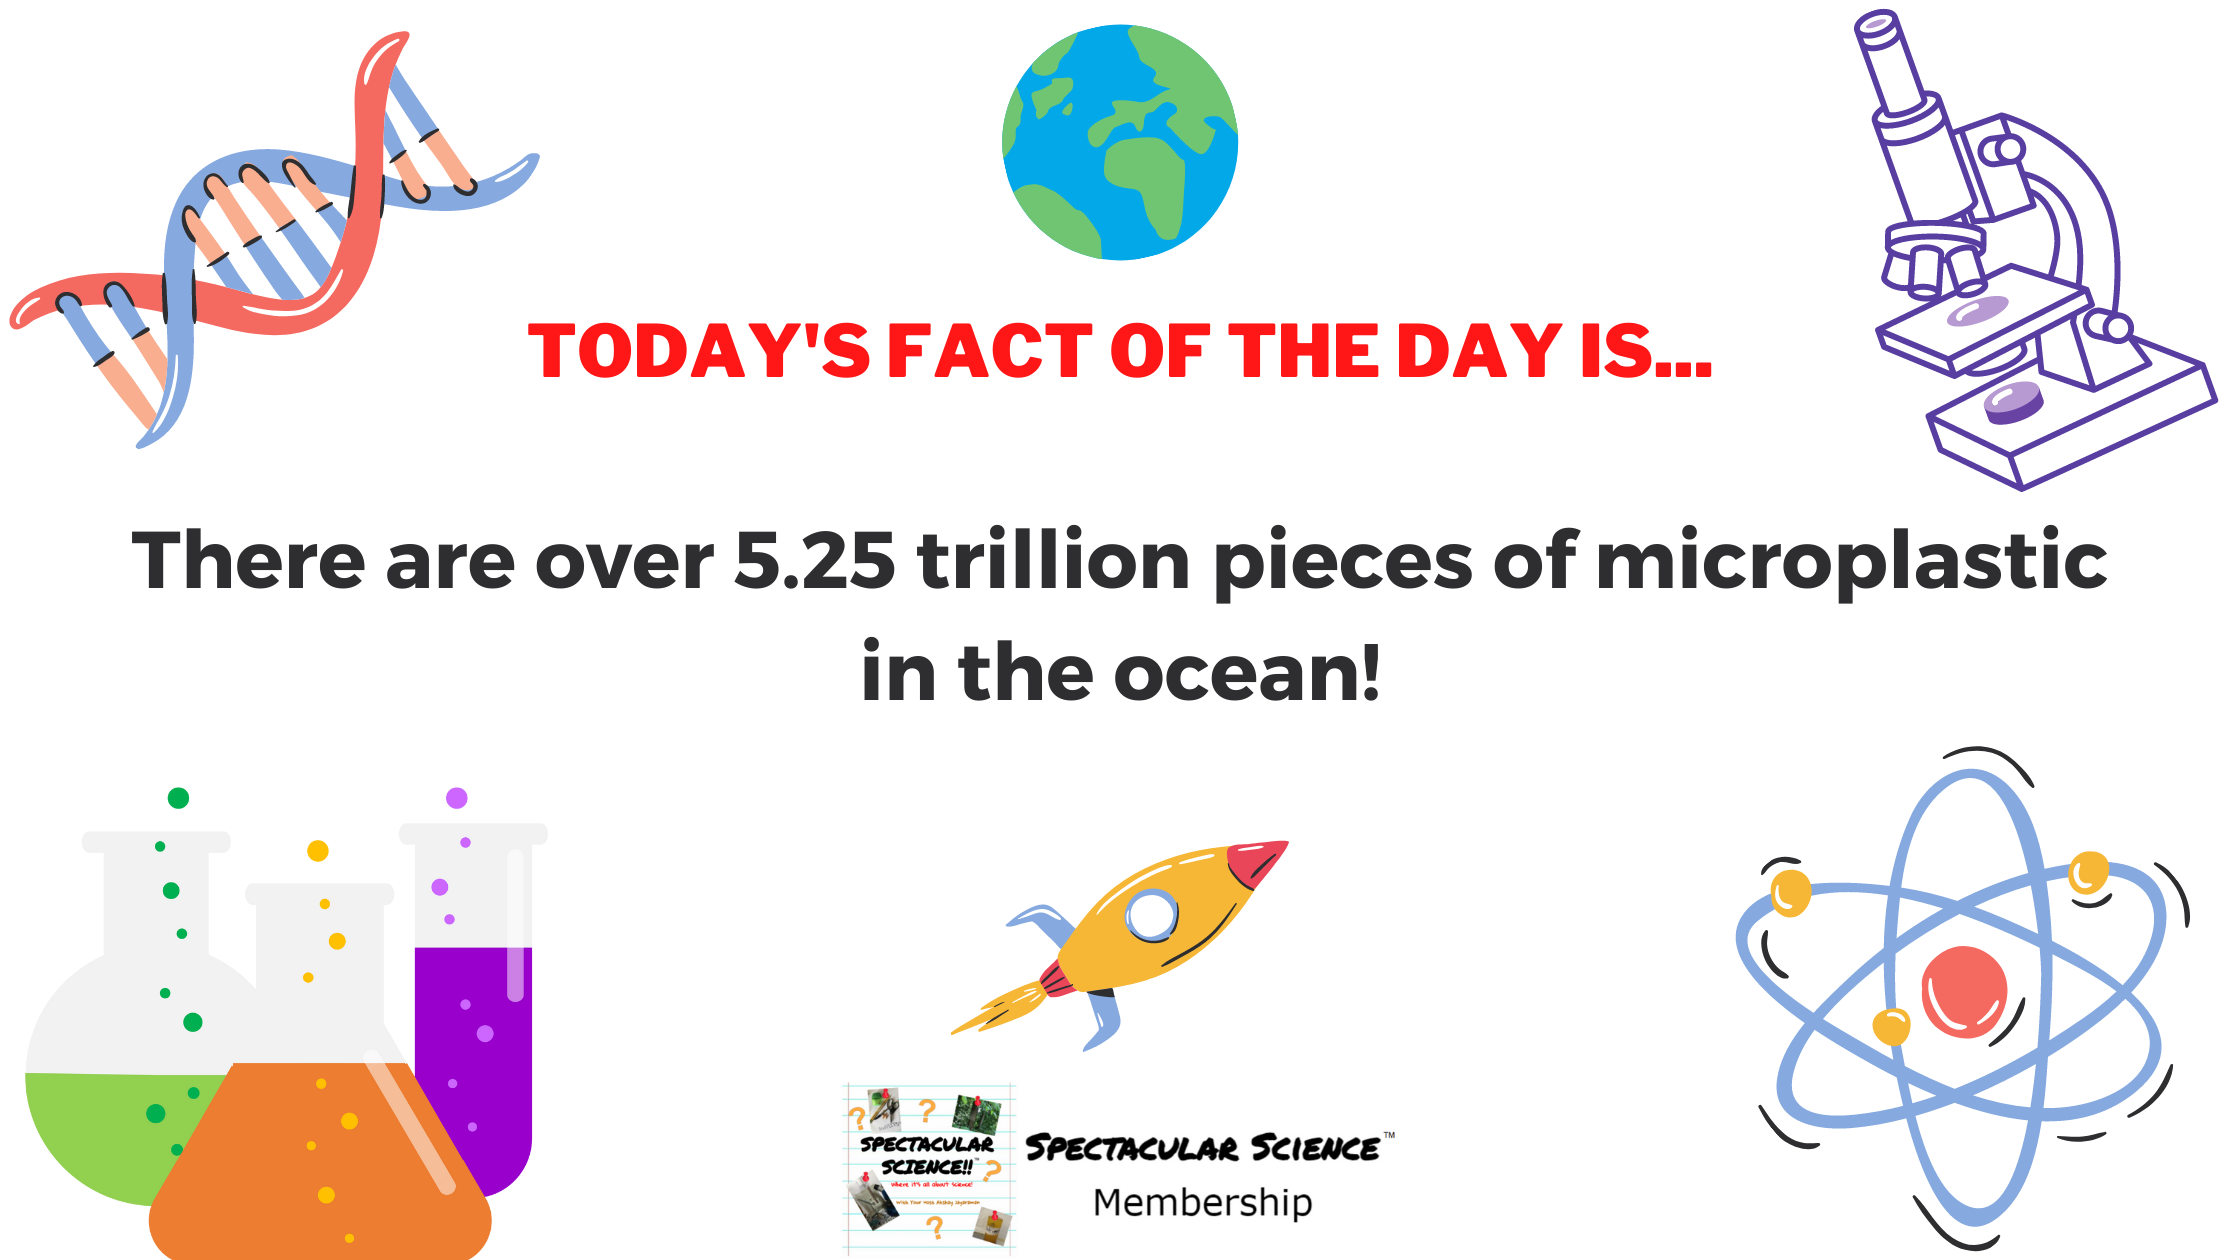 Fact of the Day Image May 4th